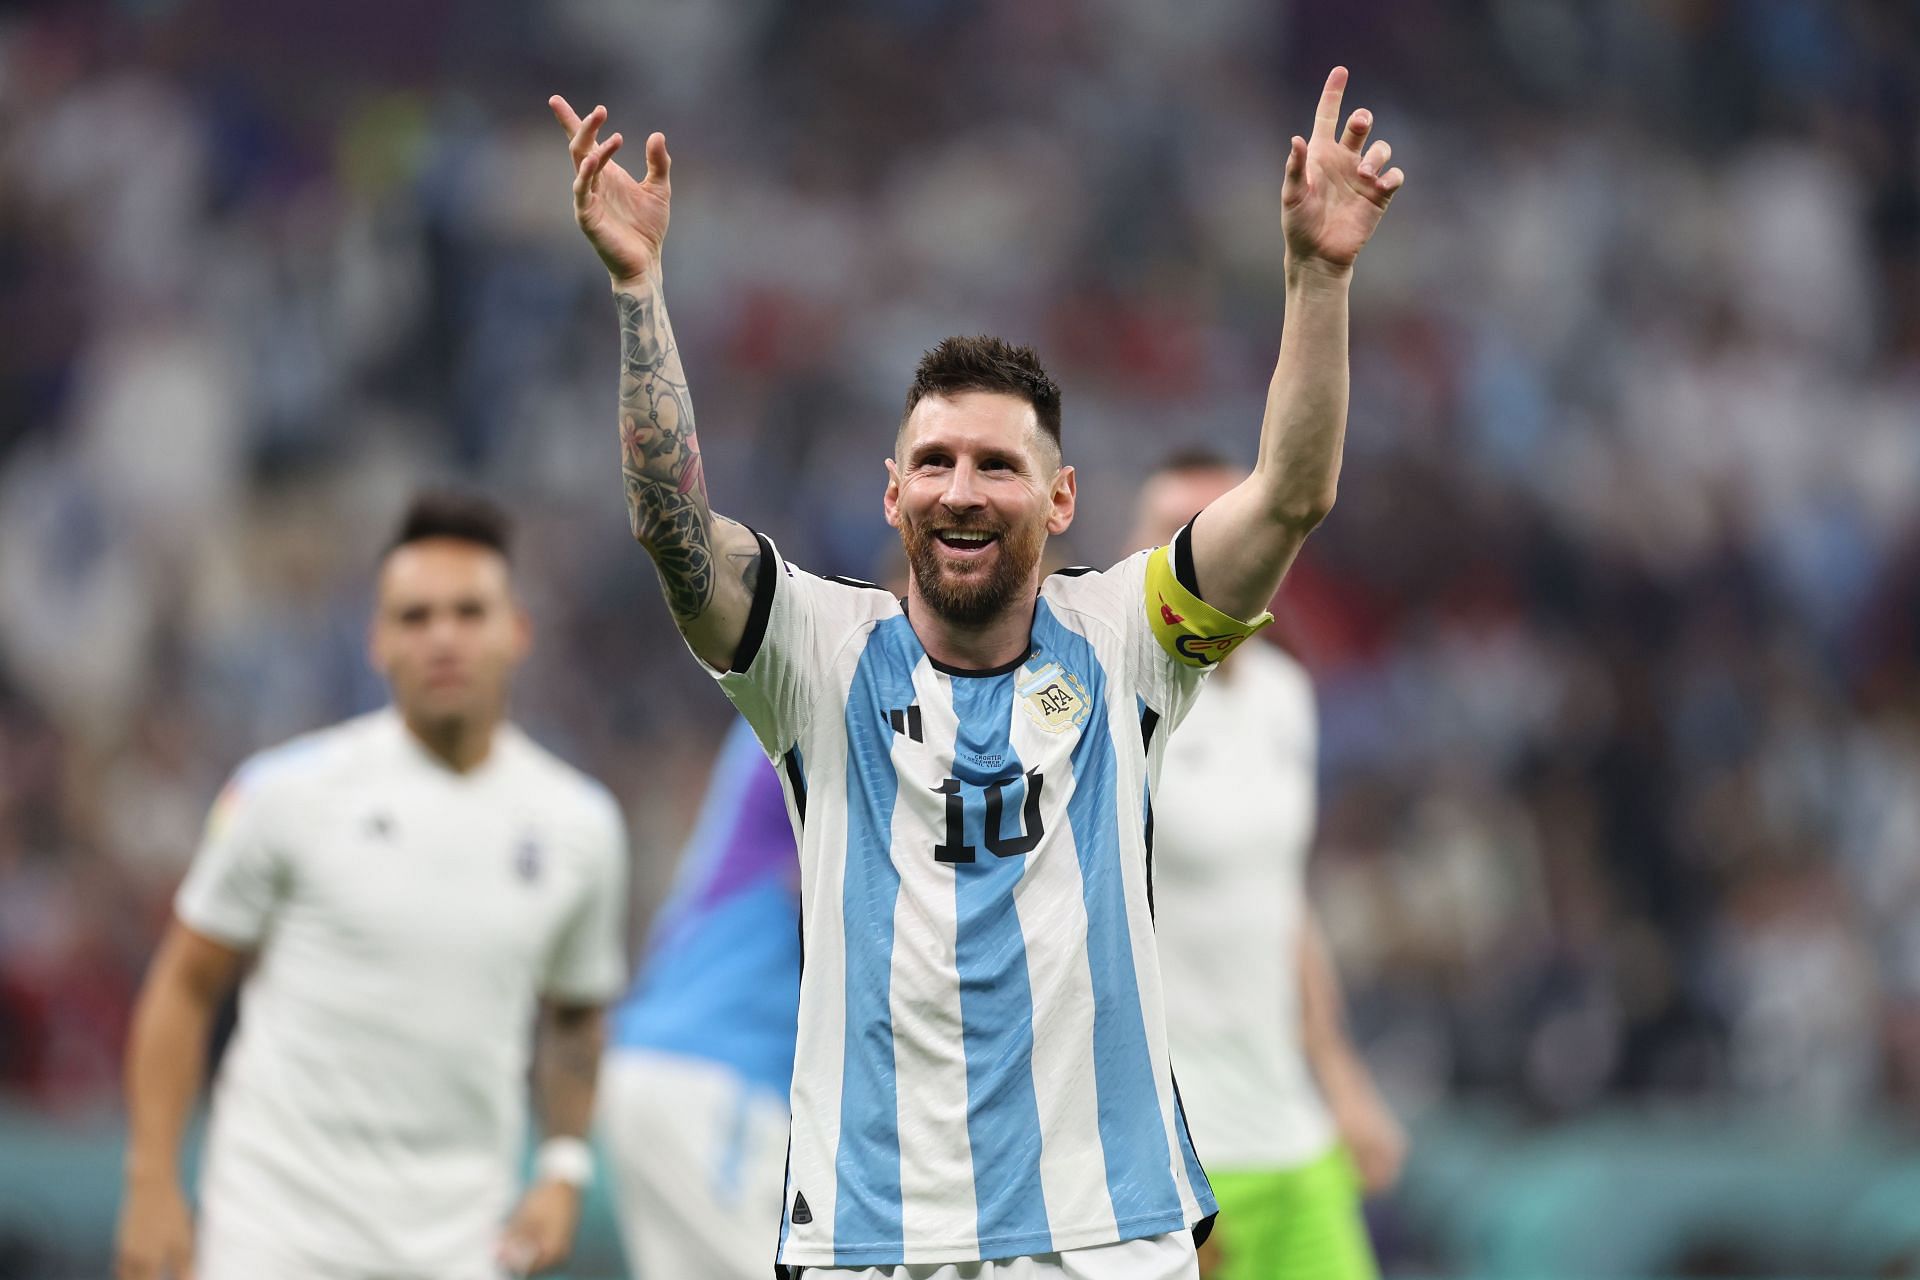 Messi has said that the final will be his last World Cup outing.